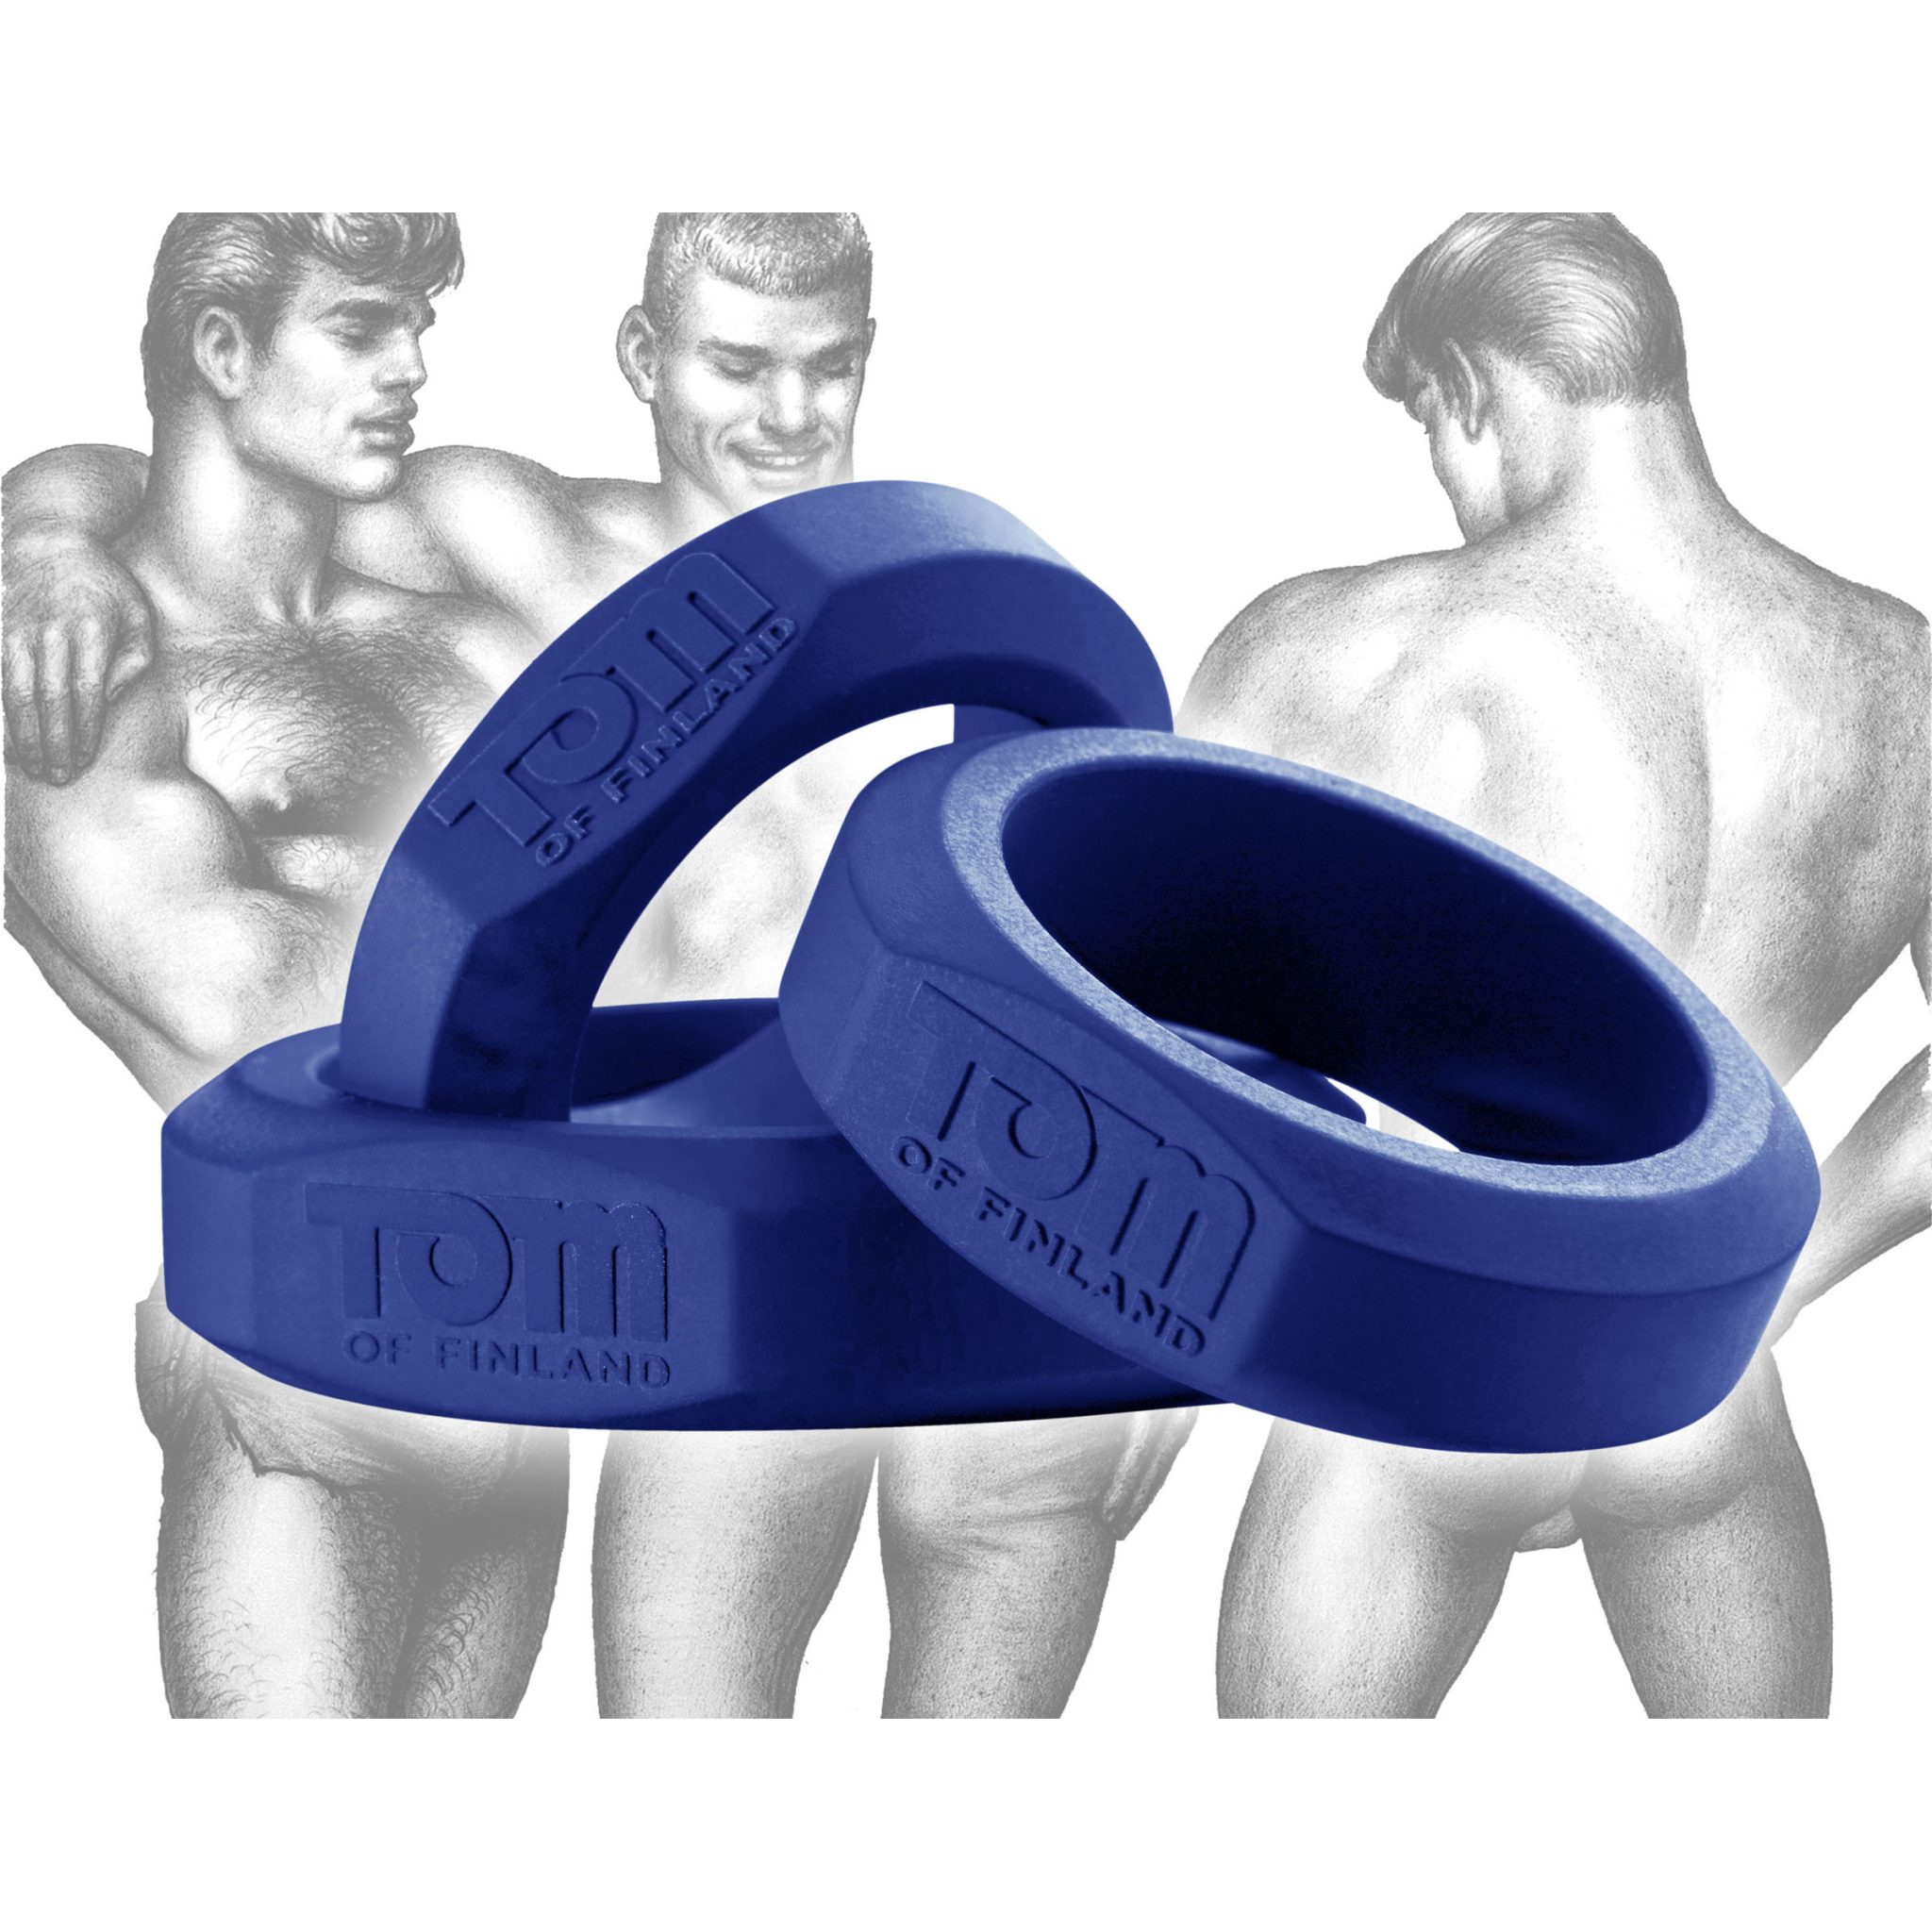 Tom of Finland 3 Piece Silicone Cock Ring Set – Blue